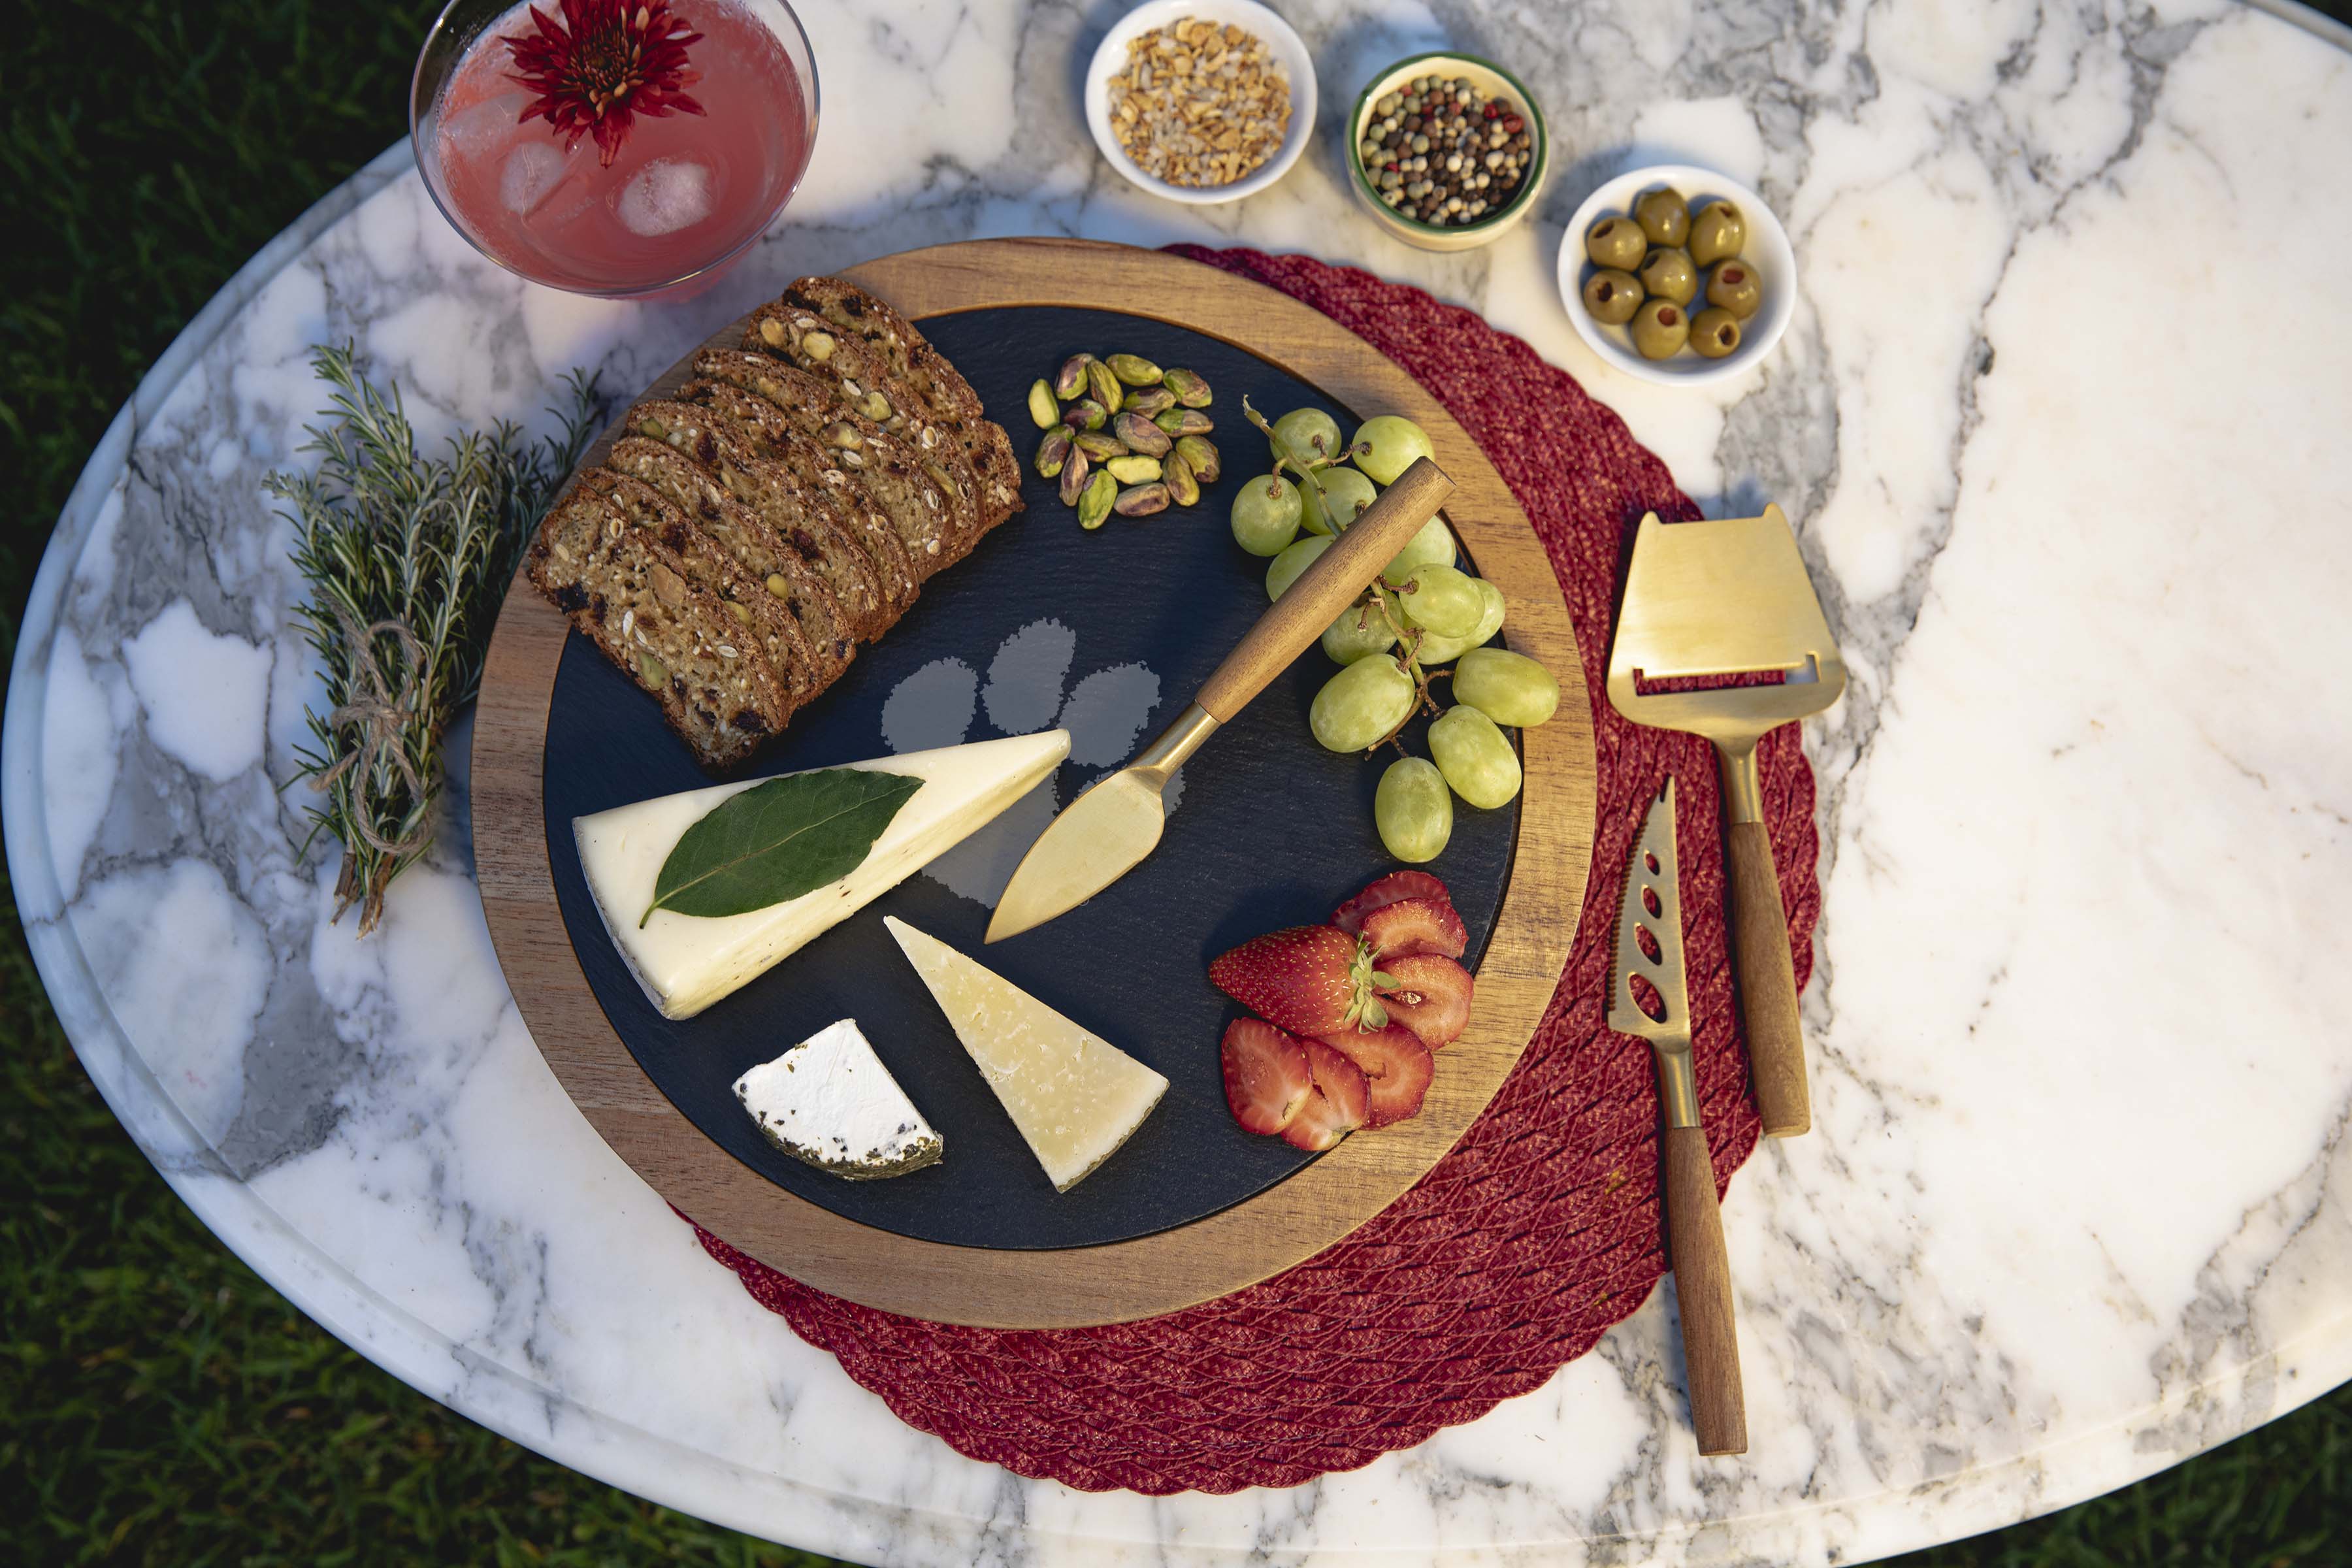 Clemson Tigers - Insignia Acacia and Slate Serving Board with Cheese Tools